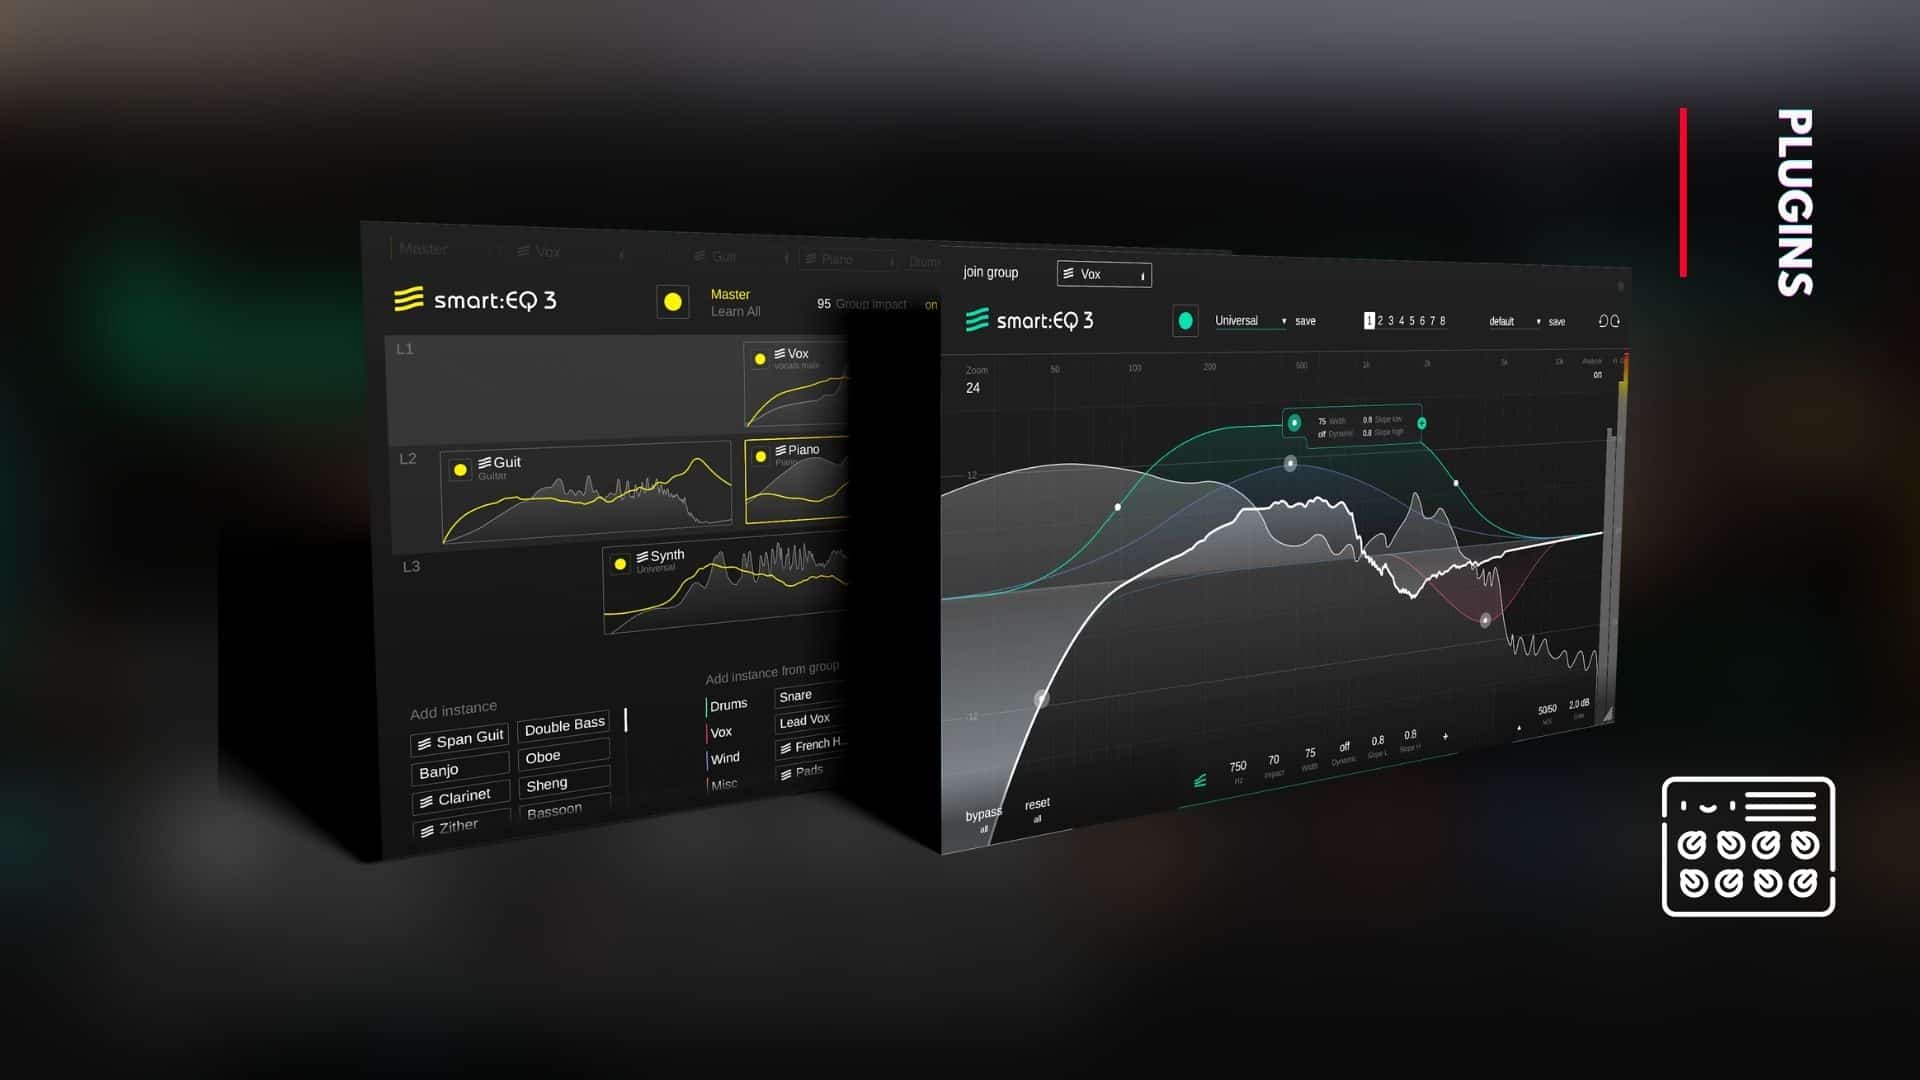 Sonible smart:EQ 3 Plugin is an AI enabled Game Changer